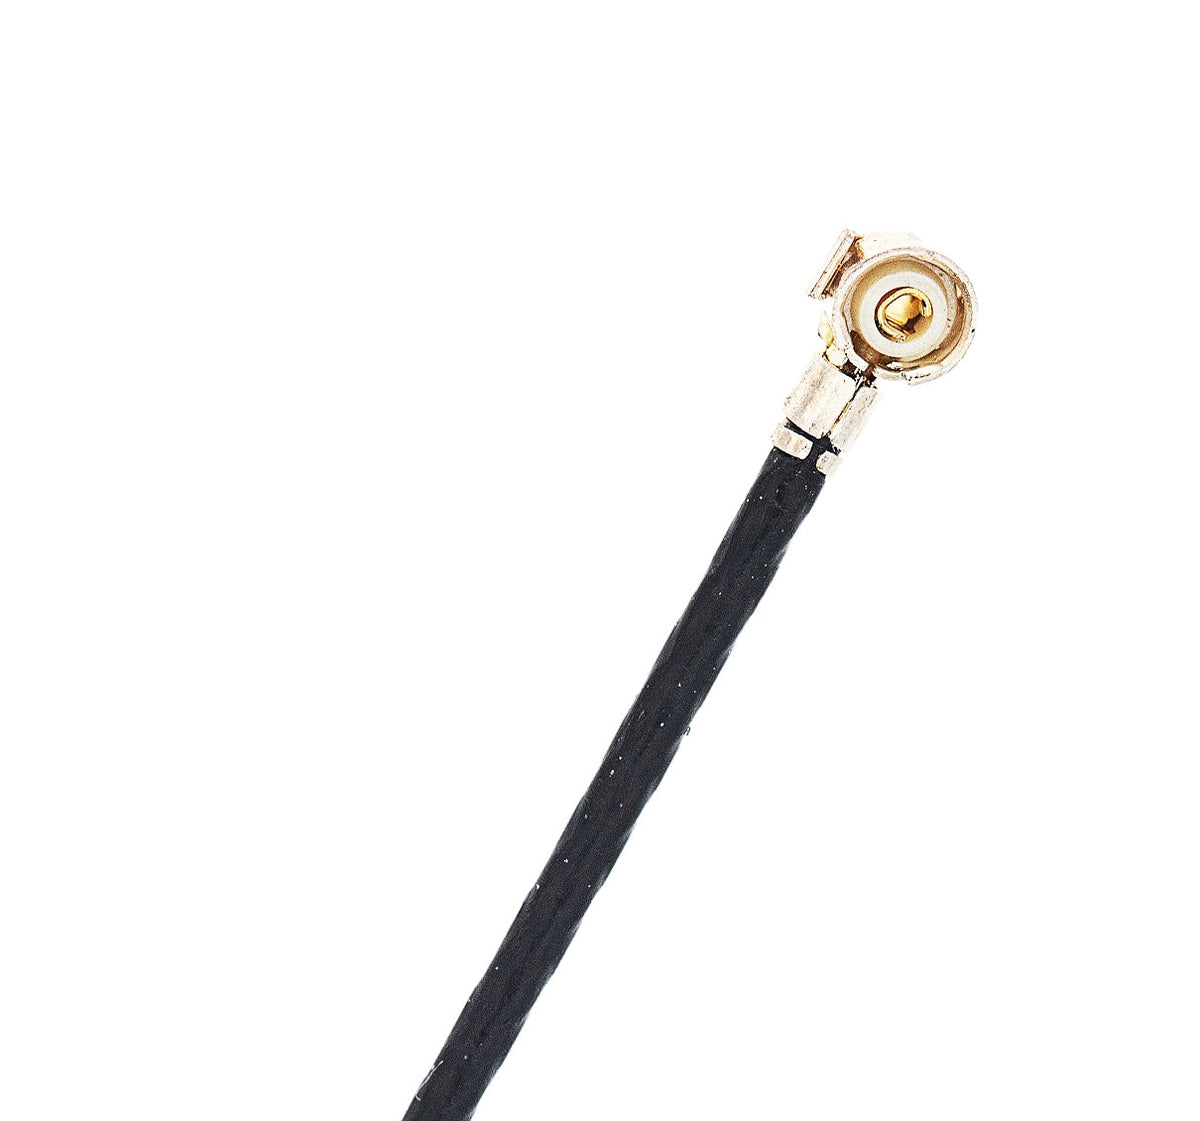 3G ANTENNA CABLE (SHORT) COMPATIBLE WITH IPAD 3 / IPAD 4